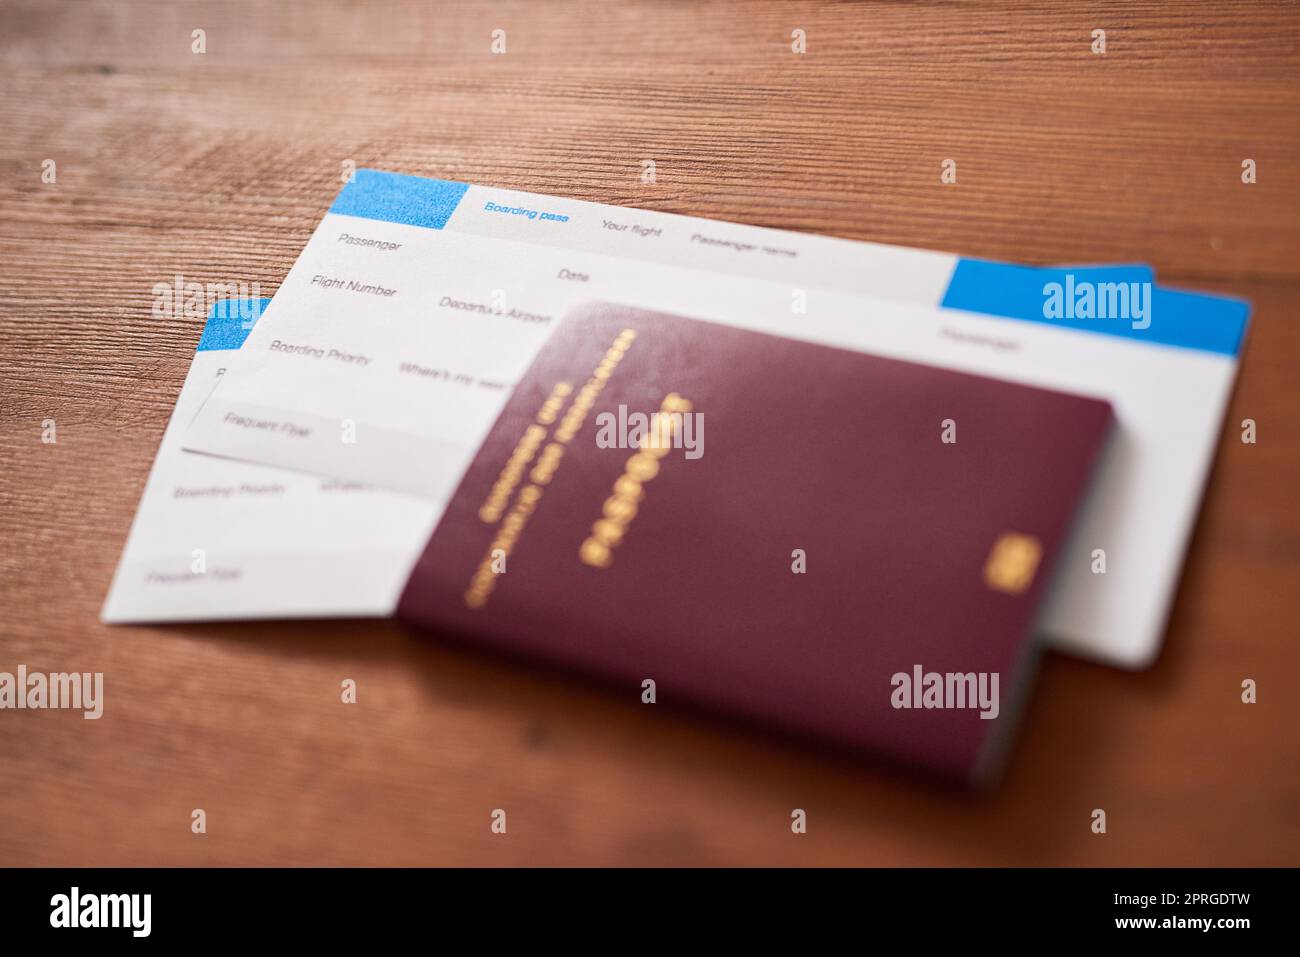 Wont get far without them. two airplane tickets and a passport on a table. Stock Photo